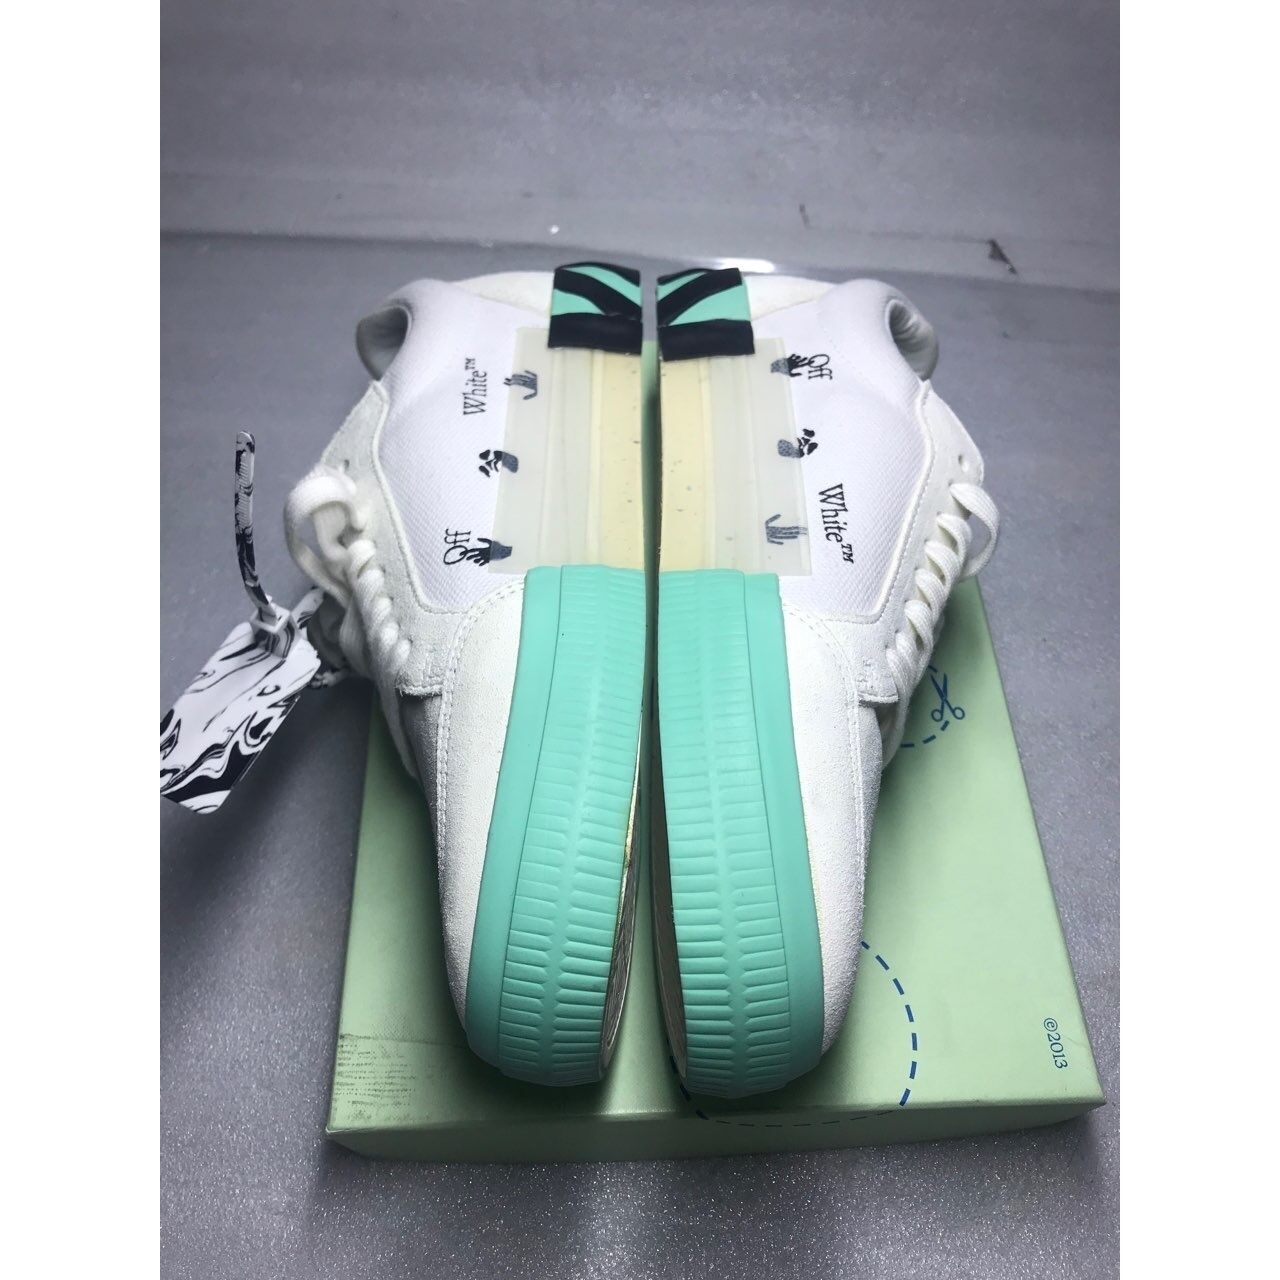 off white  low vulcanized sneakers white and mint geeen